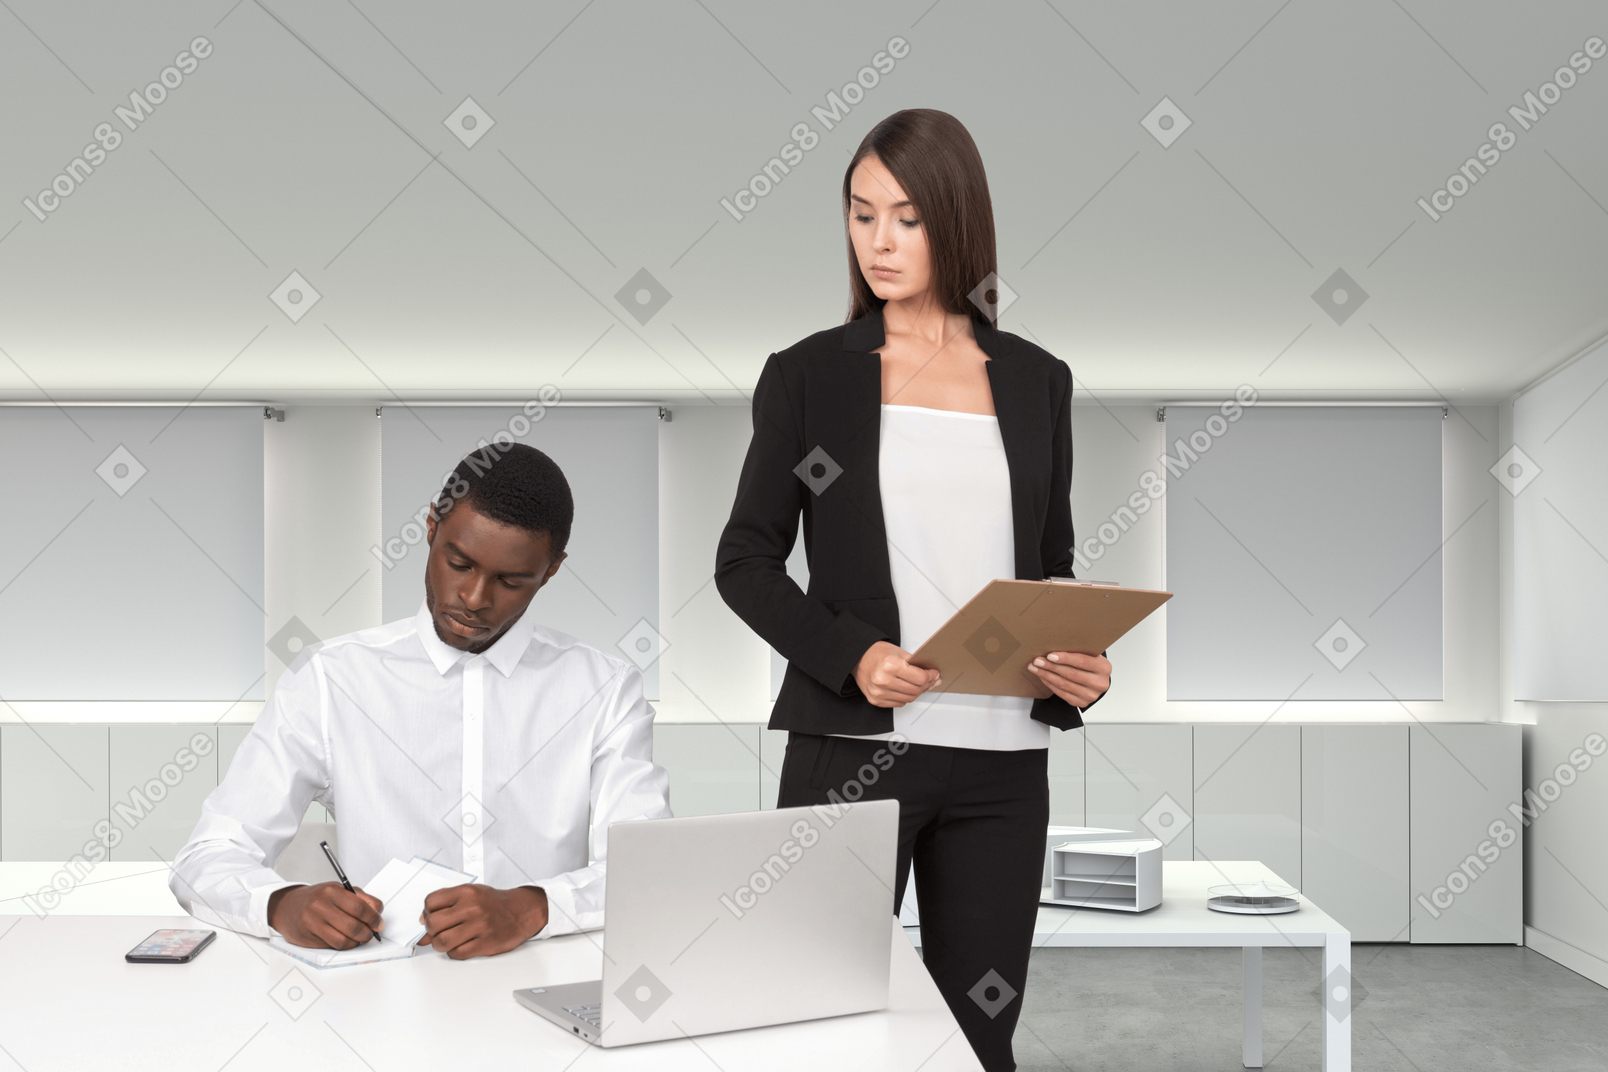 A black man is signing the document and a young beautiful lady with a folder in her hands is looking at it